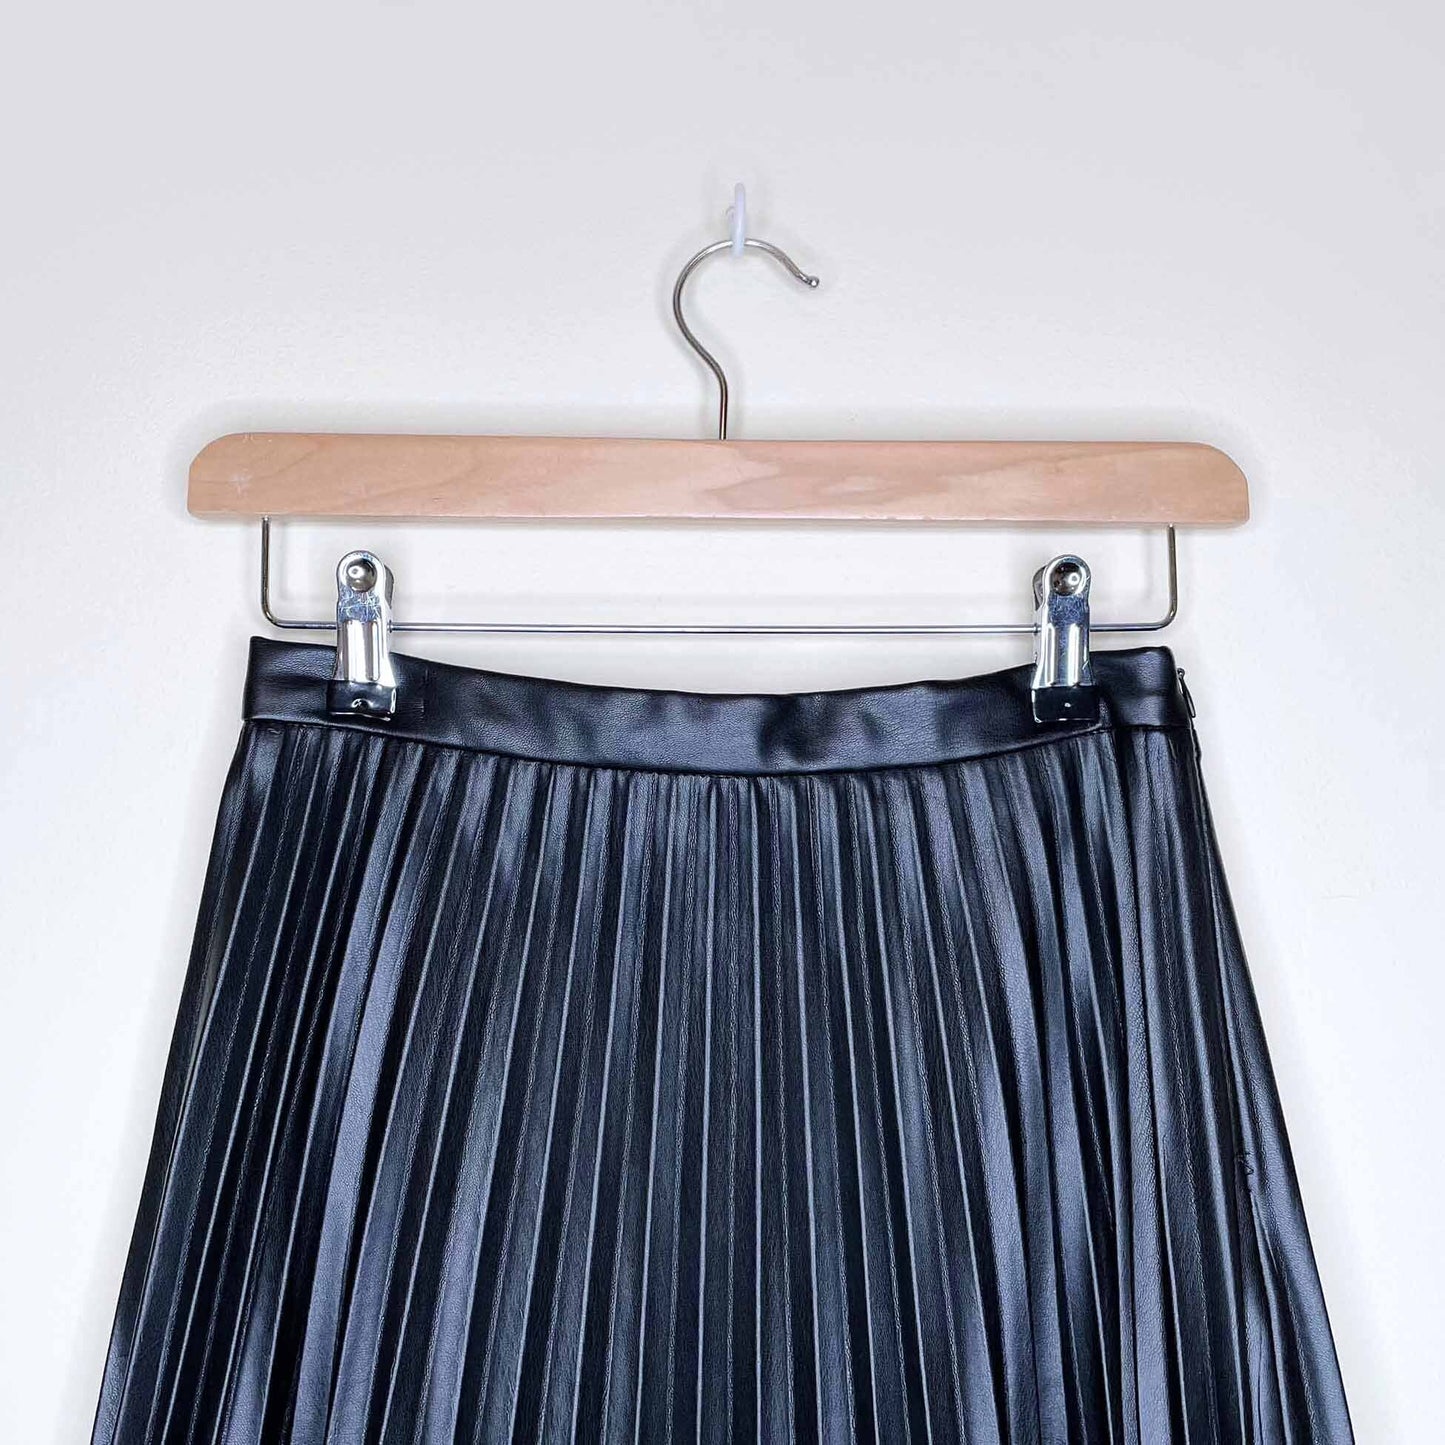 nwt 7 for all mankind faux leather accordion midi skirt - size xs